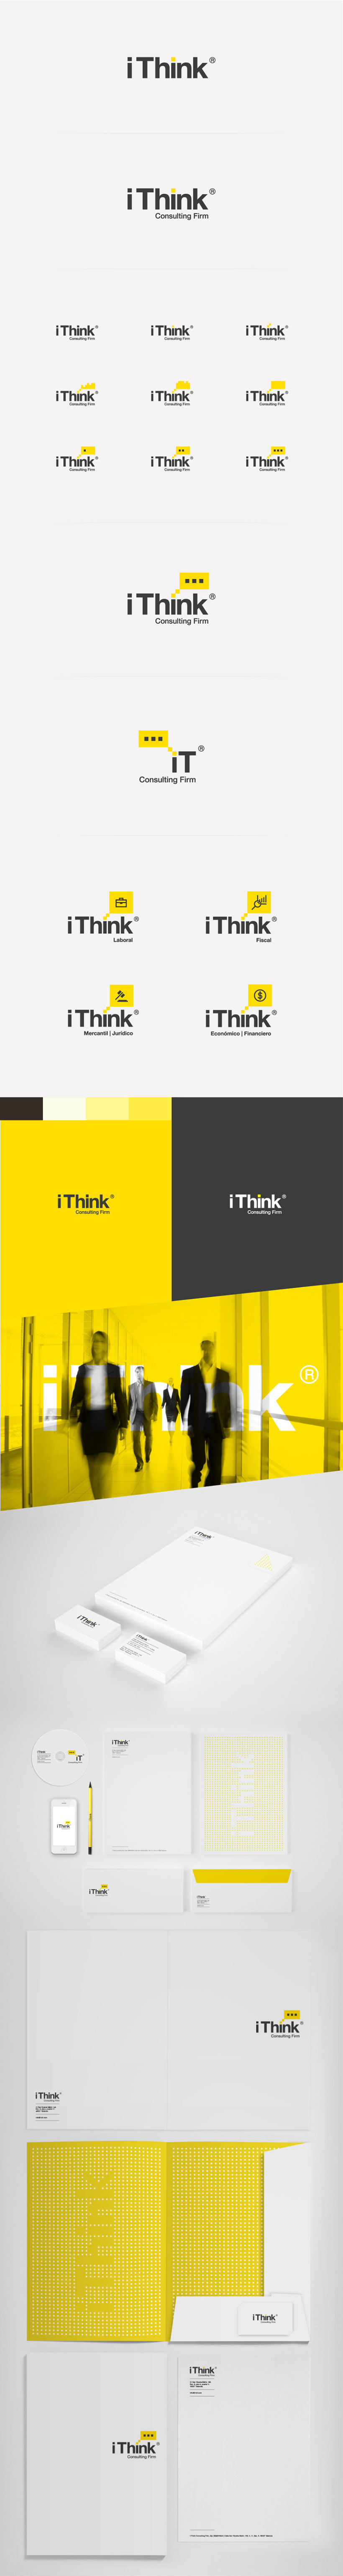 ITHINK Consulting firm 1